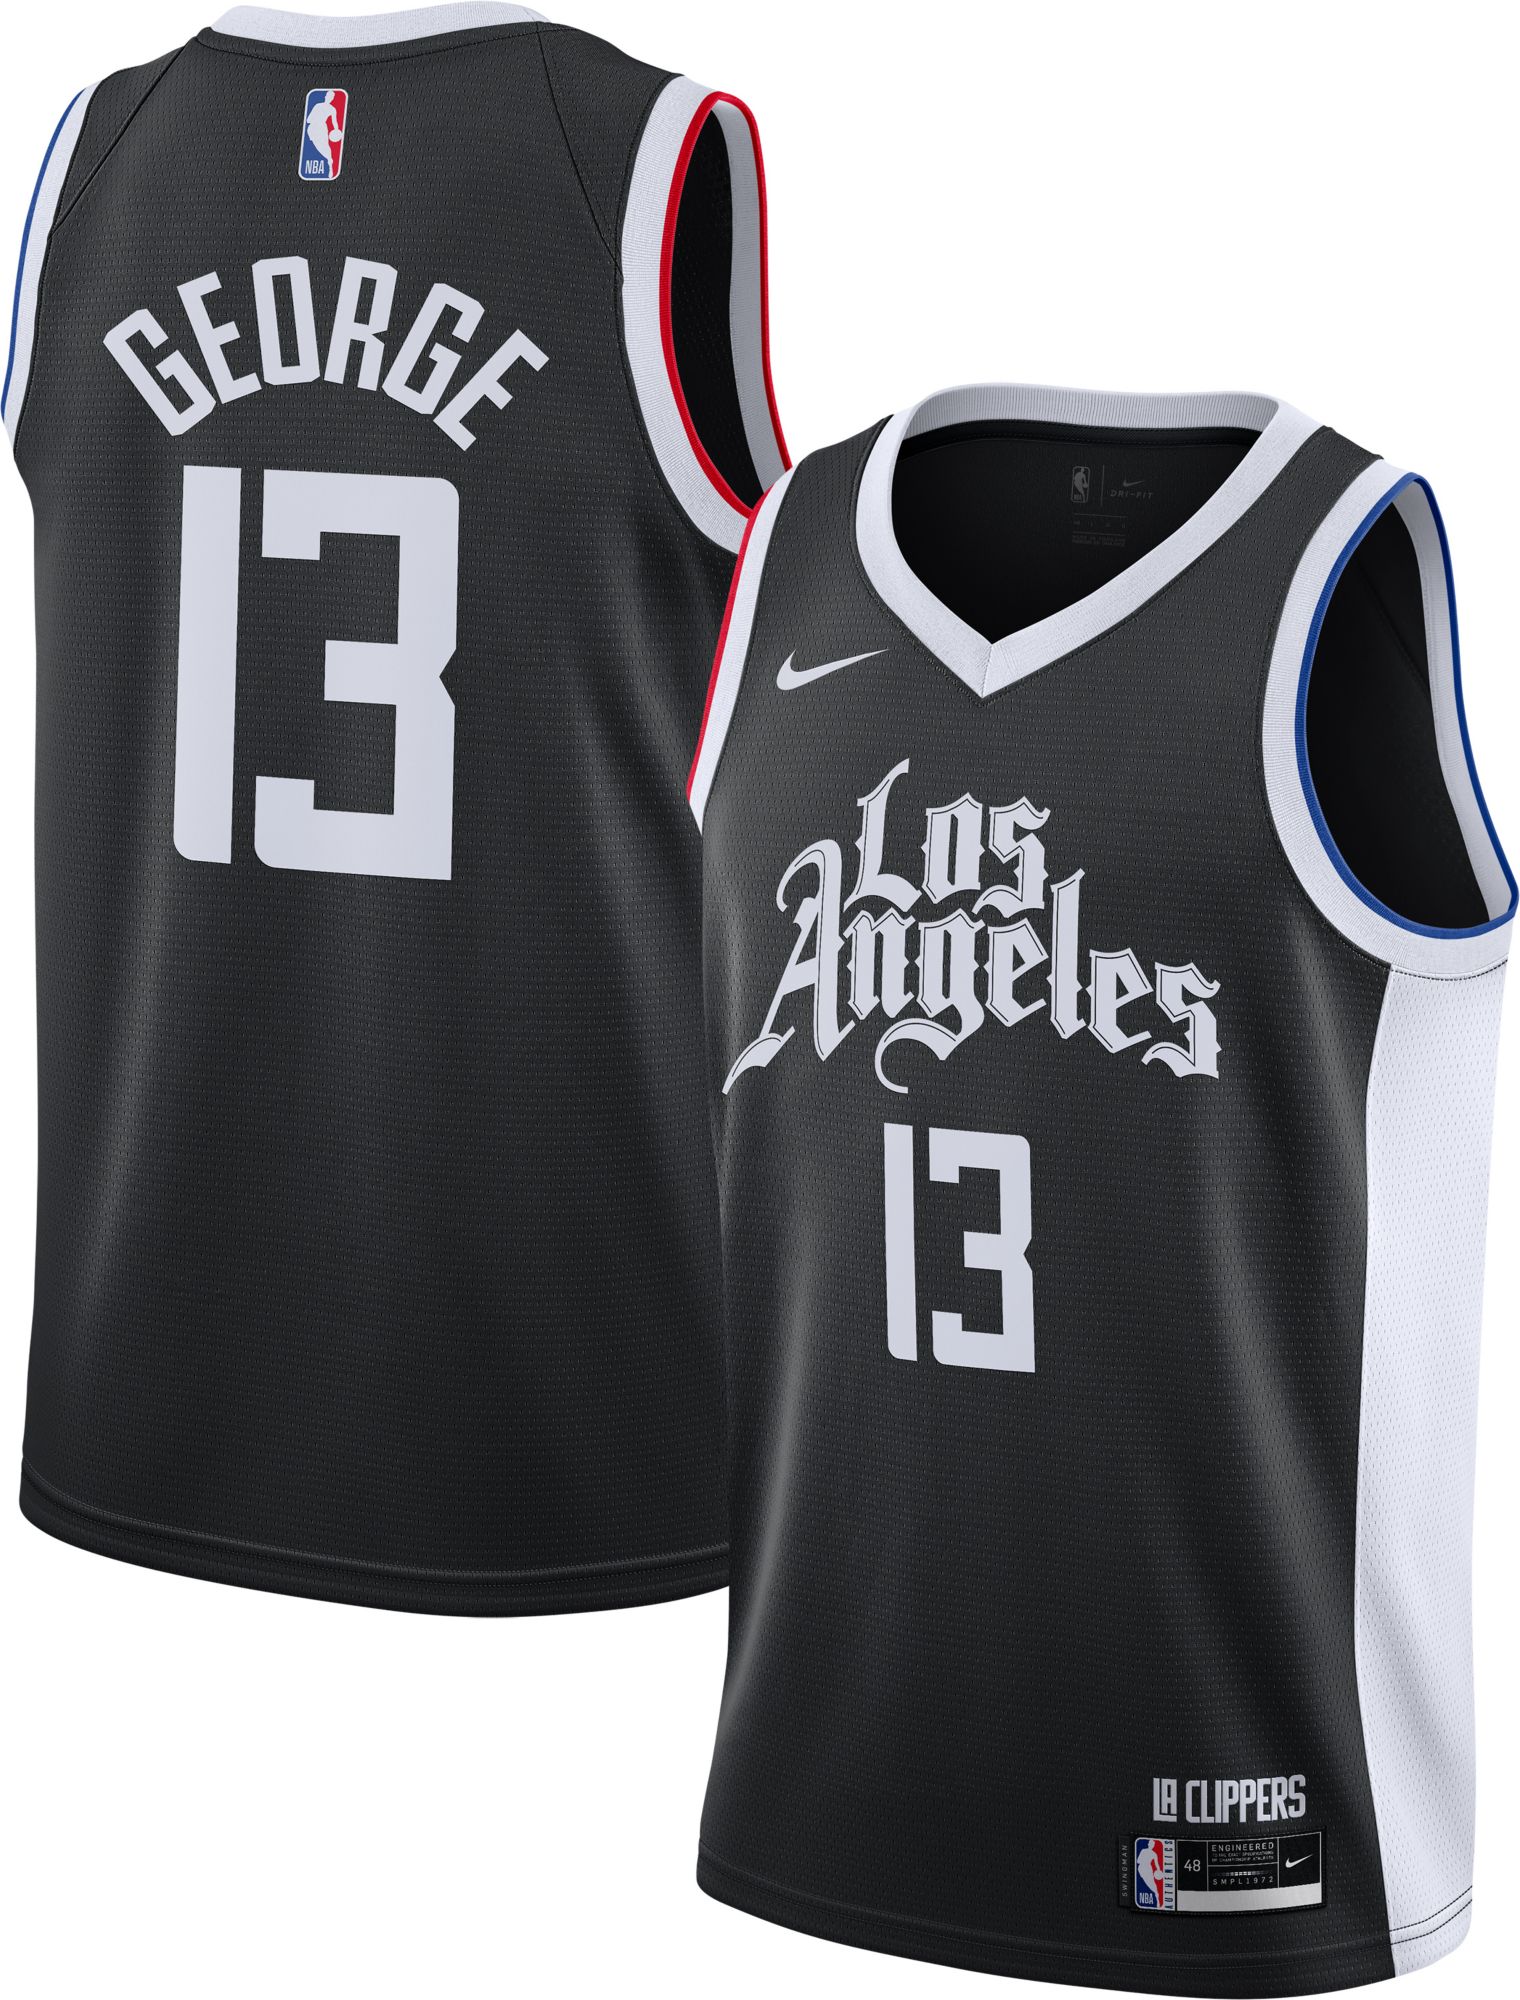 los angeles clippers jersey 2020